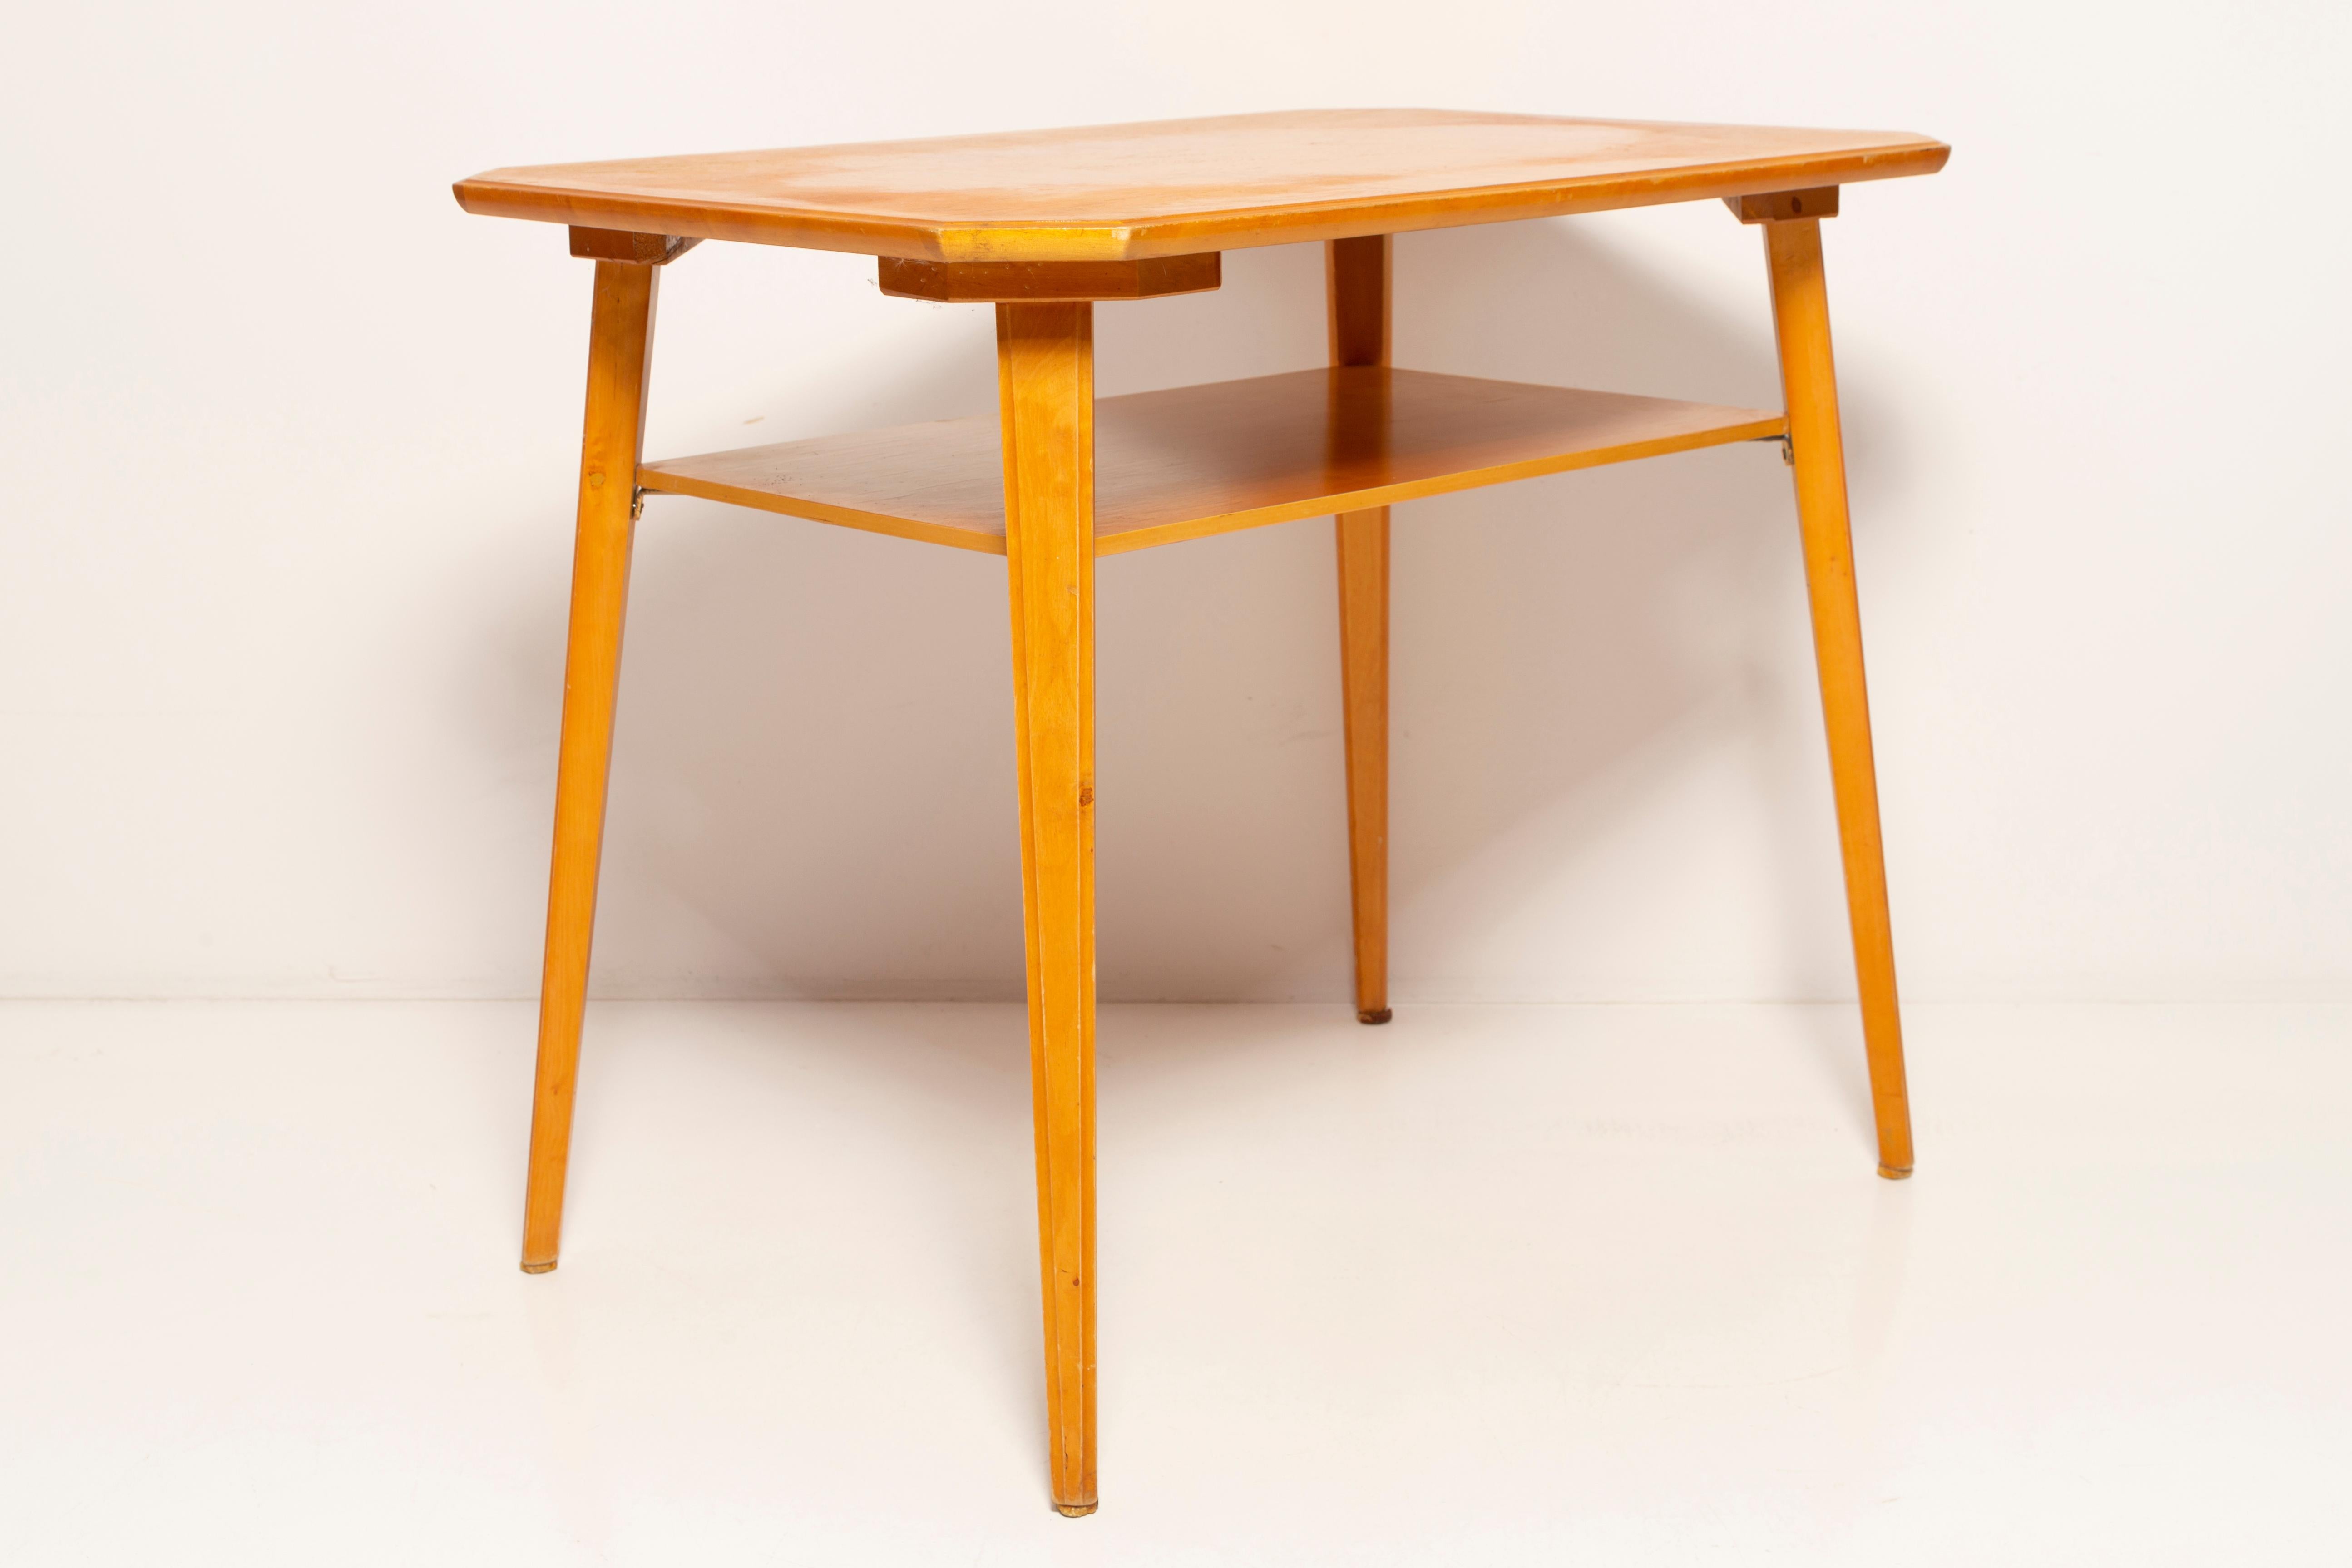 Mid-Century Modern Coffee Table, Light Wood, Europe, 1960s For Sale 2